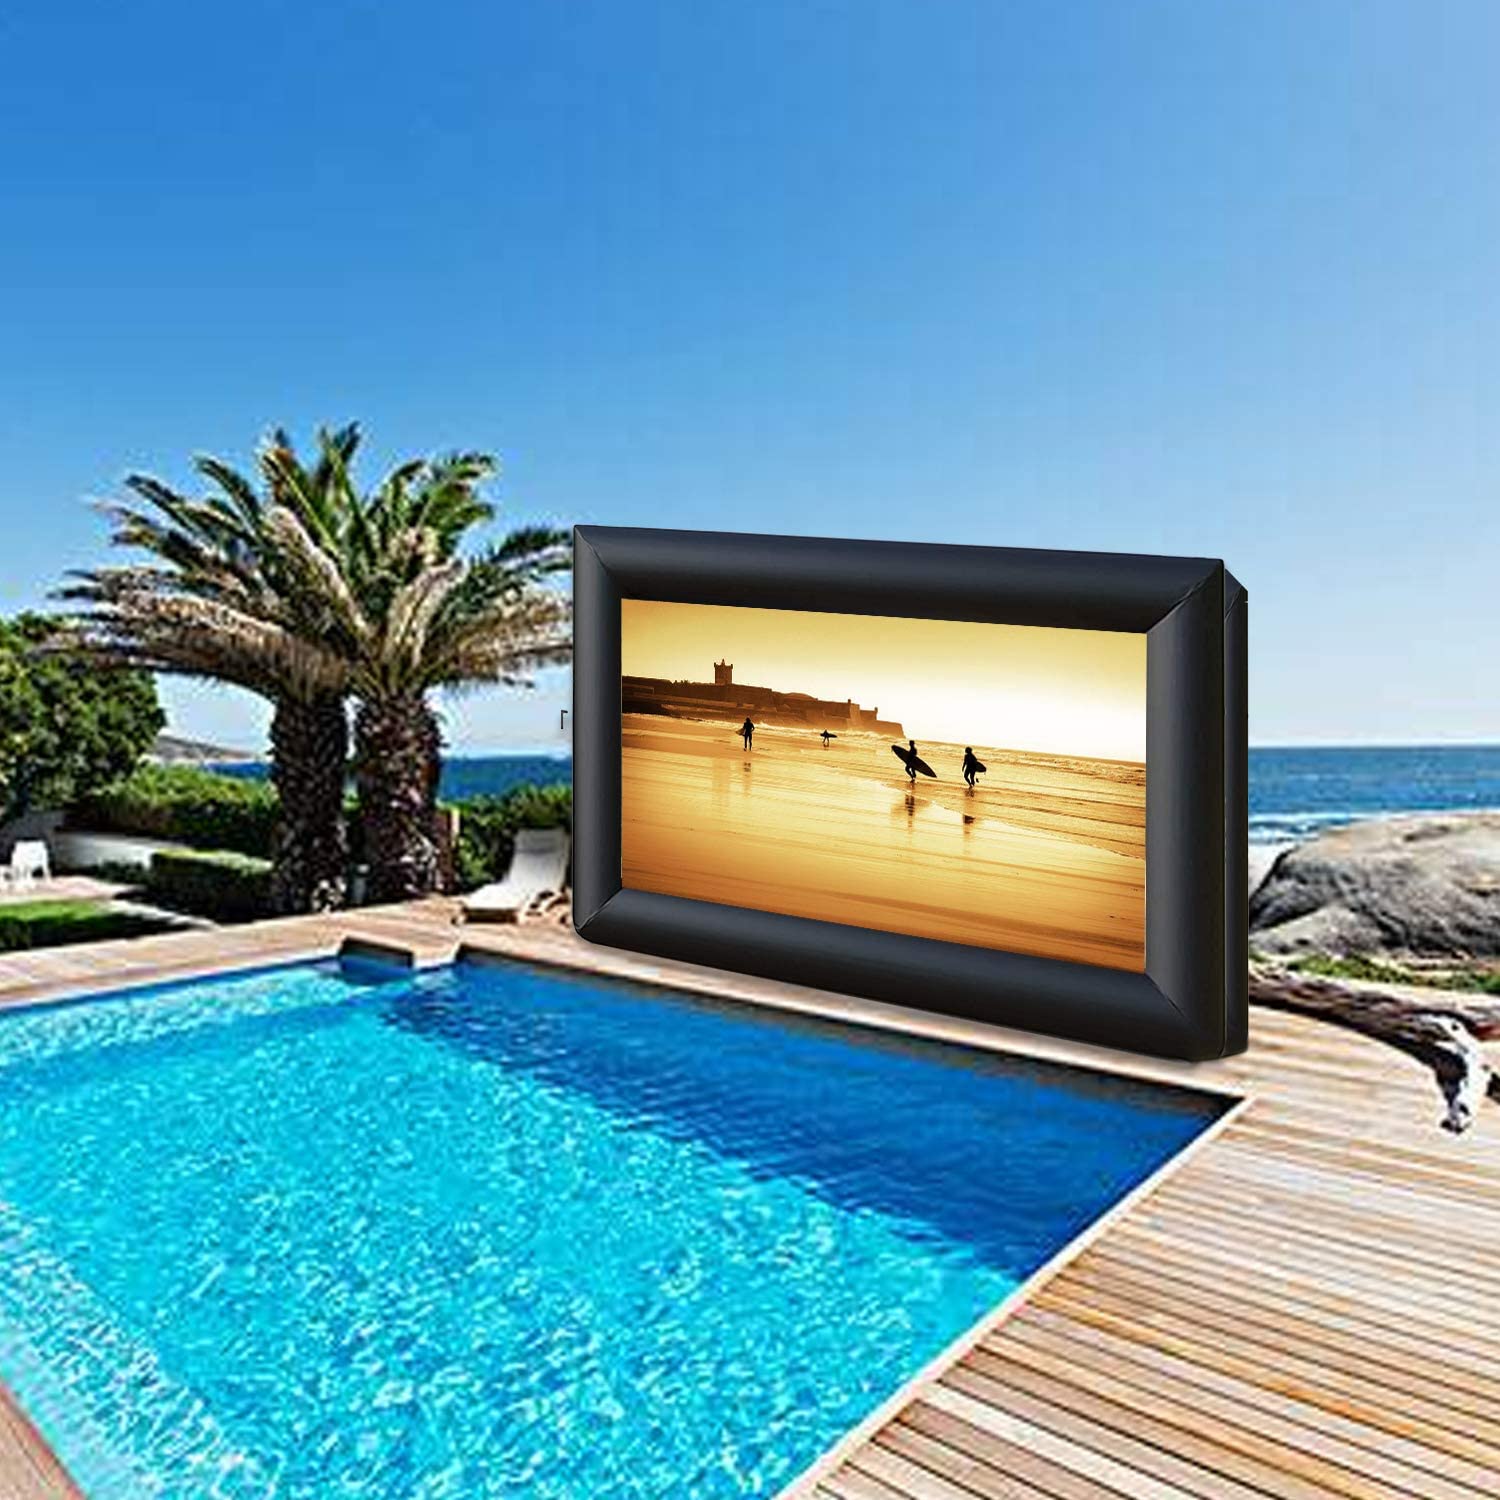 6 Best Inflatable Movie Screens of 2021 for Football, Parties, & More